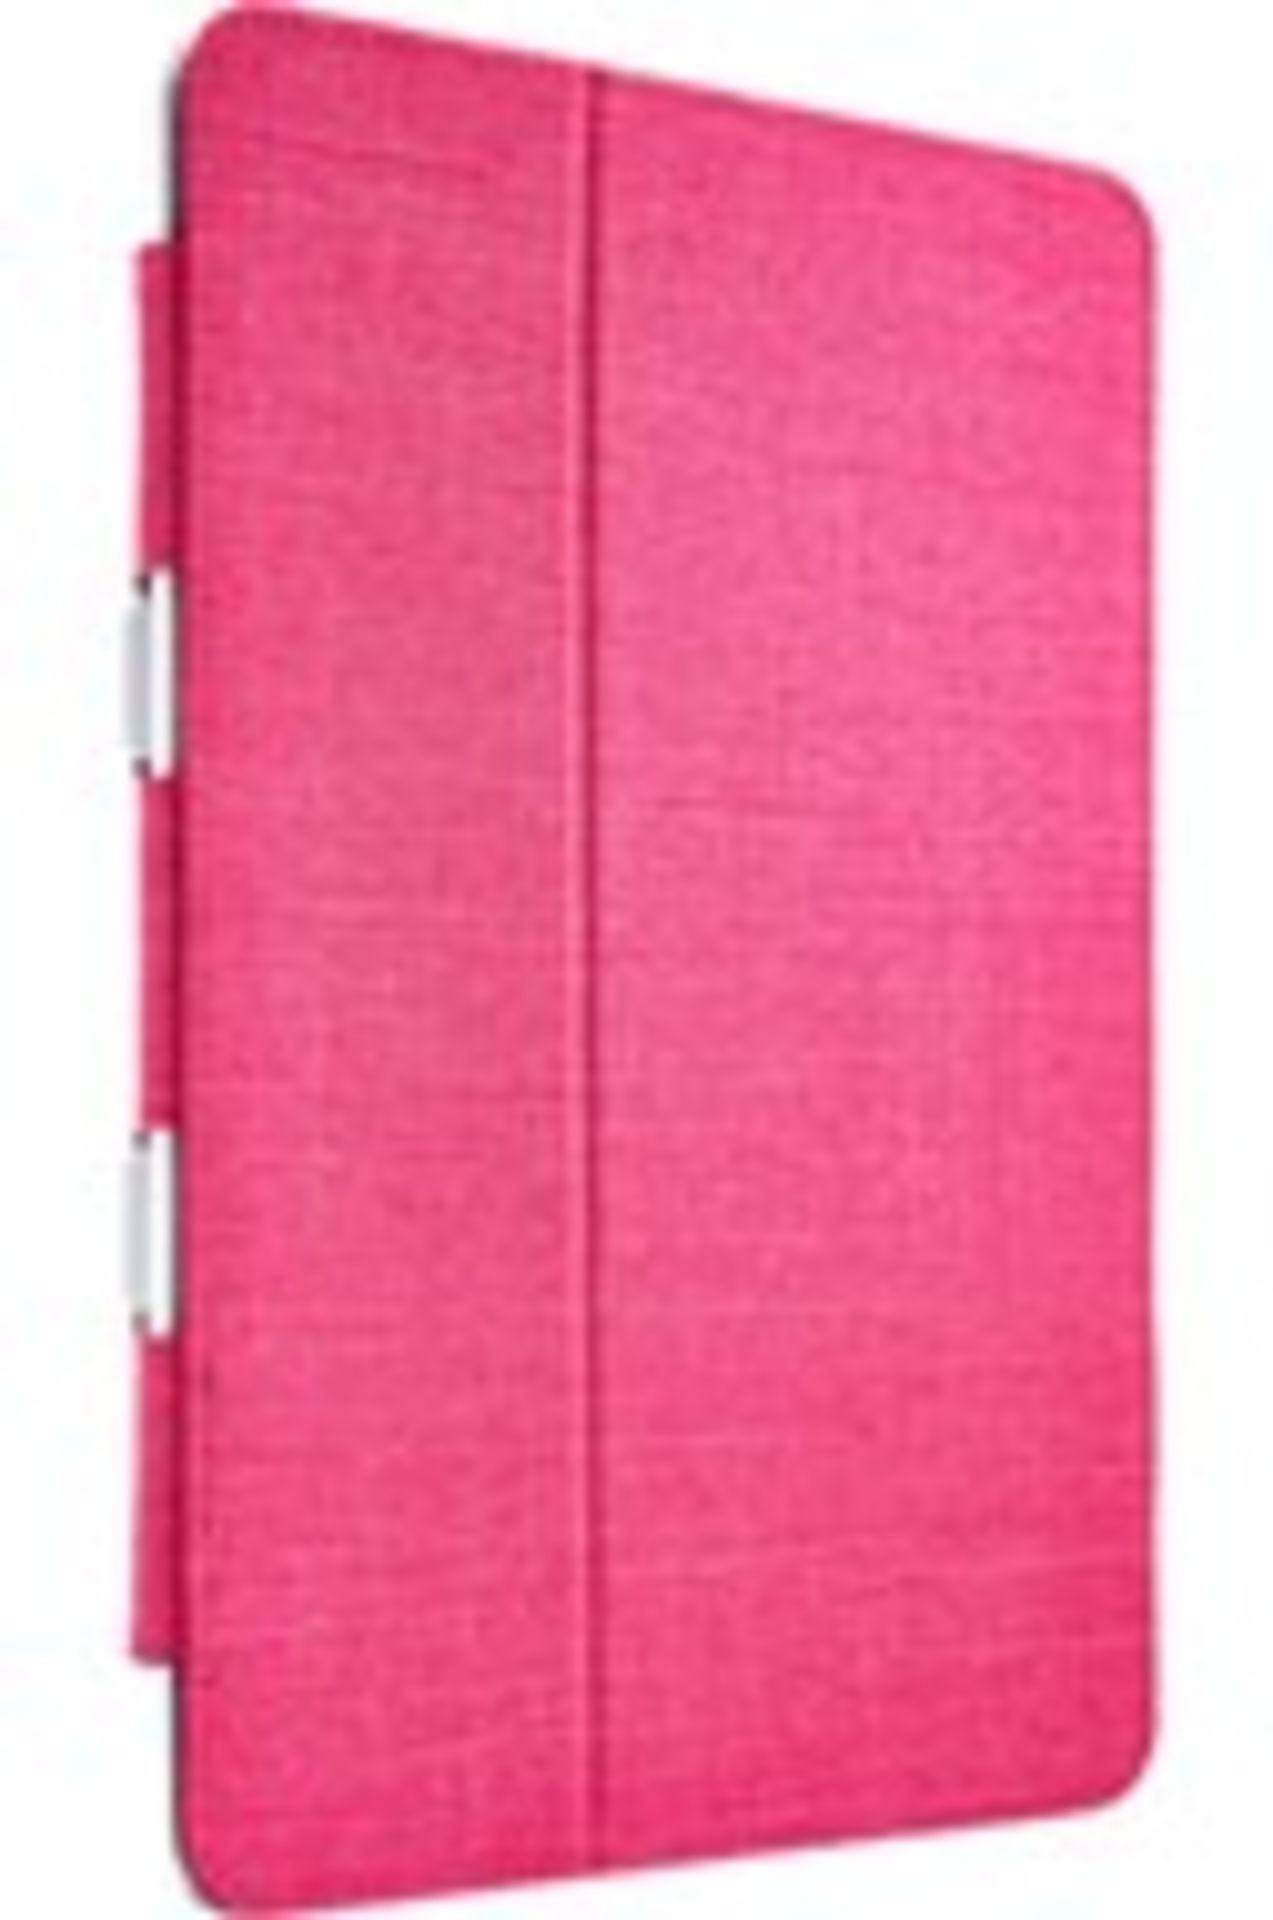 1457 X BRAND NEW CASE LOGIC FSI1095P PHLOX PINK SNAPVIEW CASES FOR IPAD AIR AND IPAD AIR 2